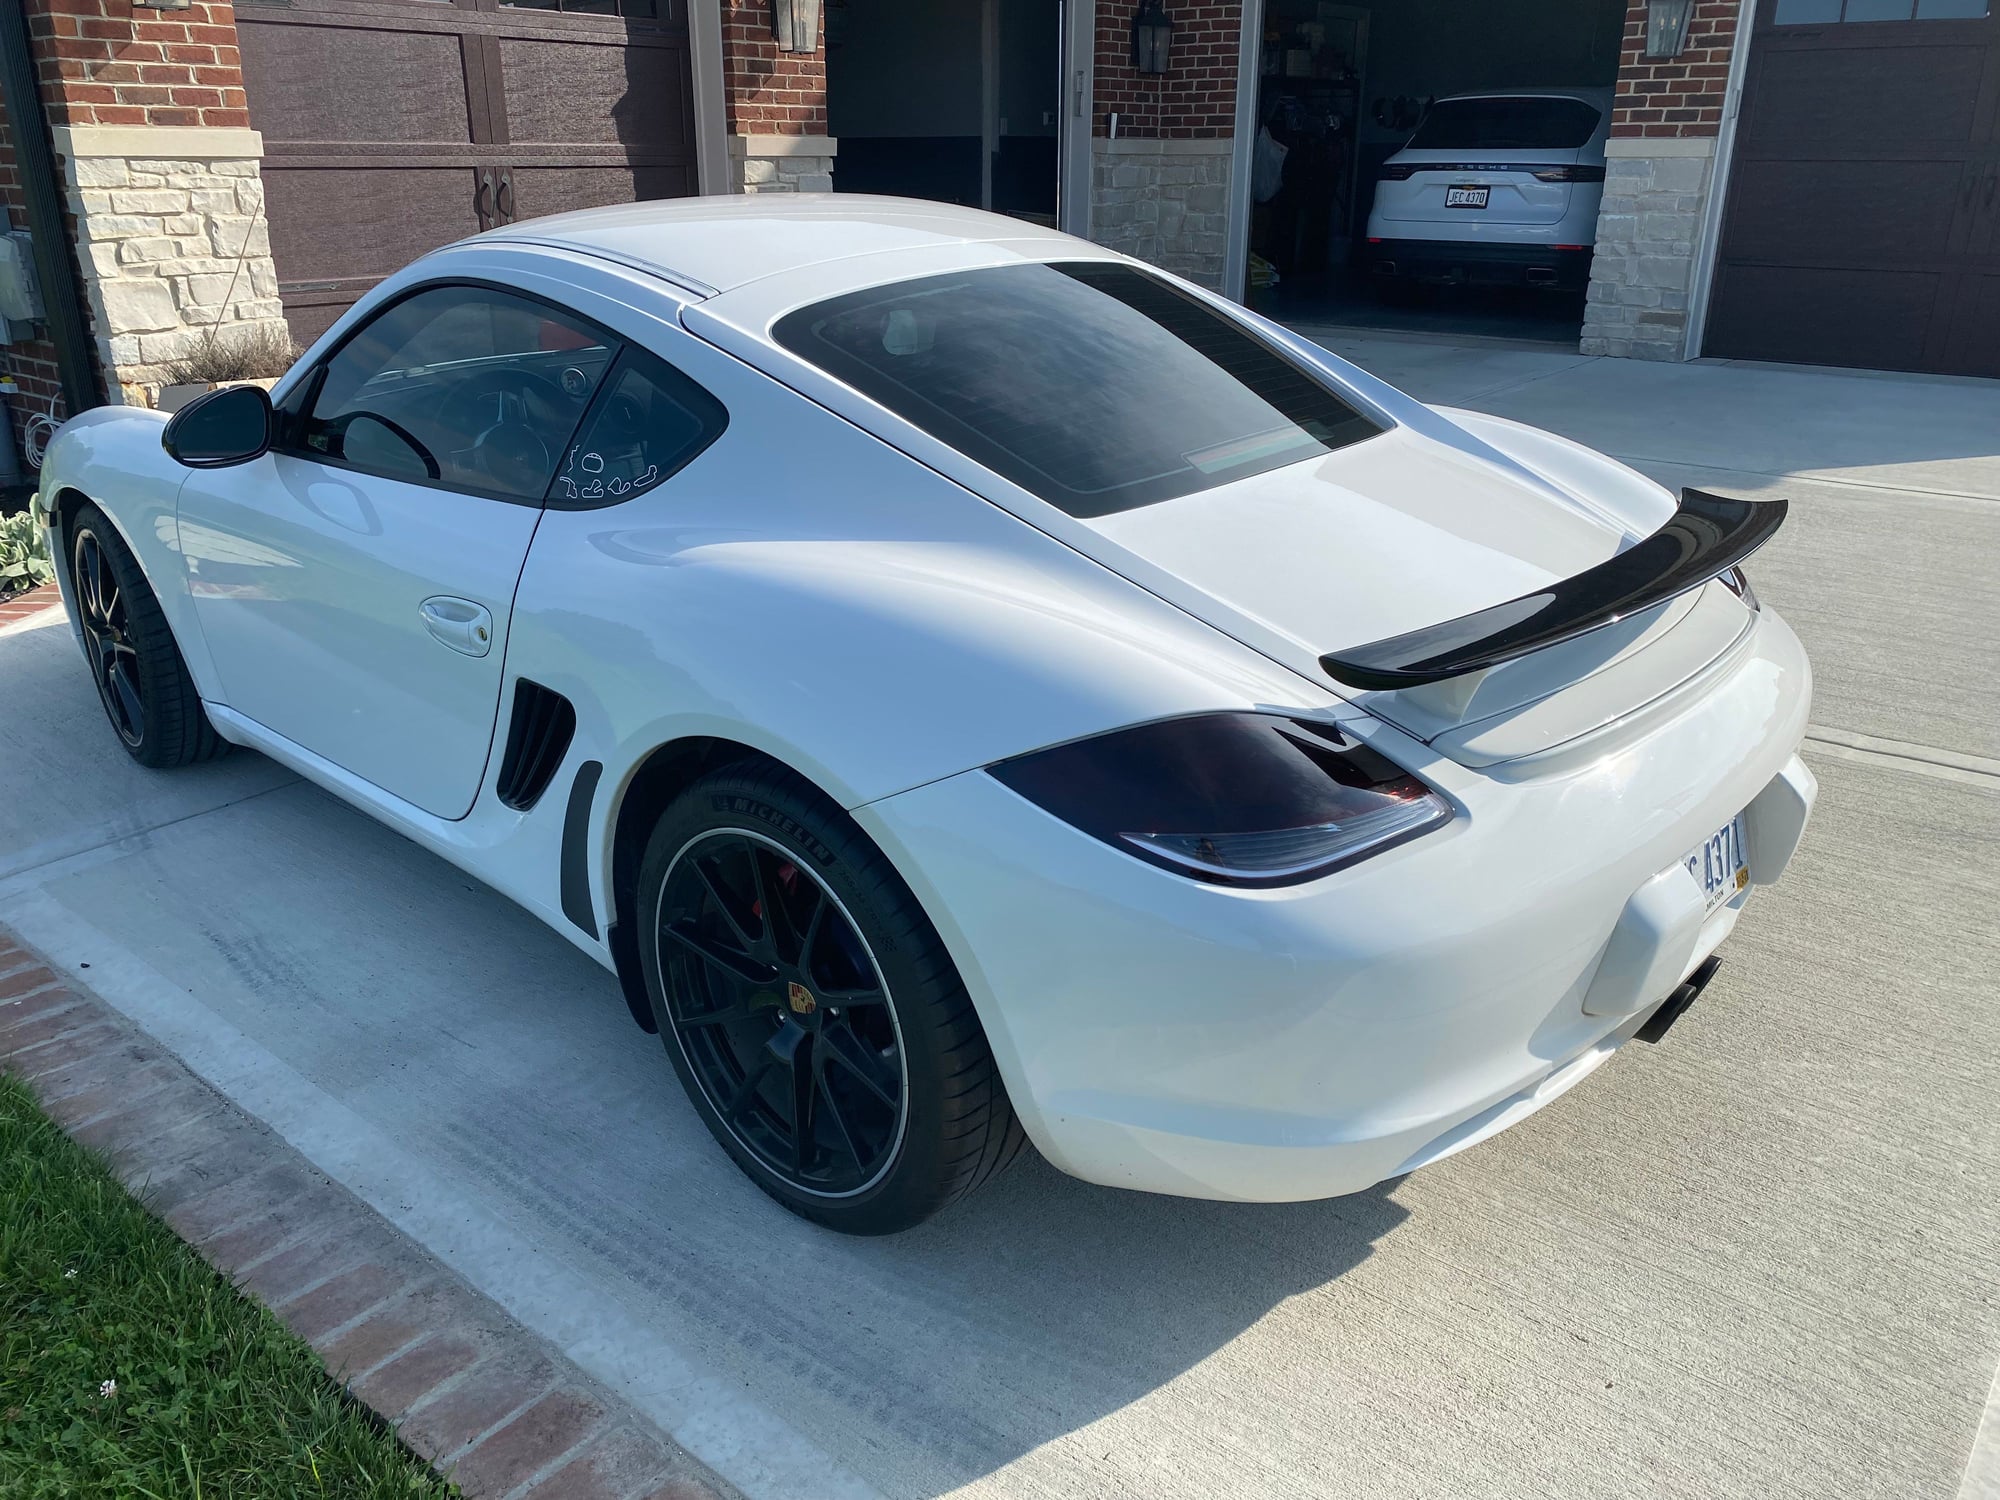 2011 Porsche Cayman -  - Used - VIN WP0AB2A84BU780711 - 6 cyl - 2WD - Automatic - Coupe - White - Cincinnati, OH 45255, United States